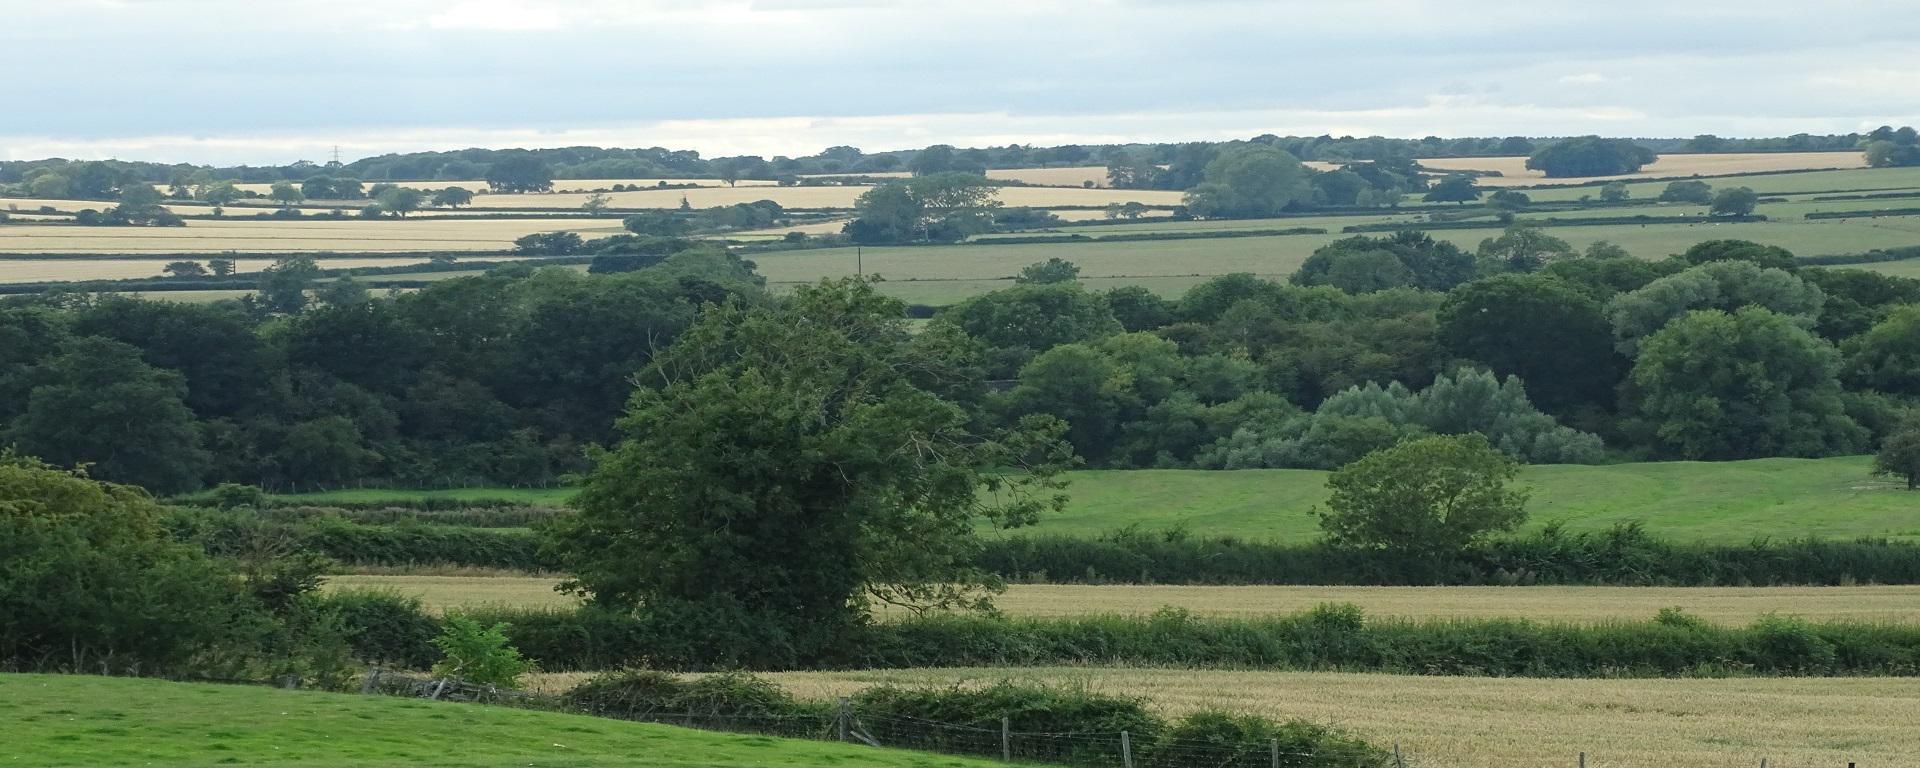 This is a view of the countryside that surrounds Padbury